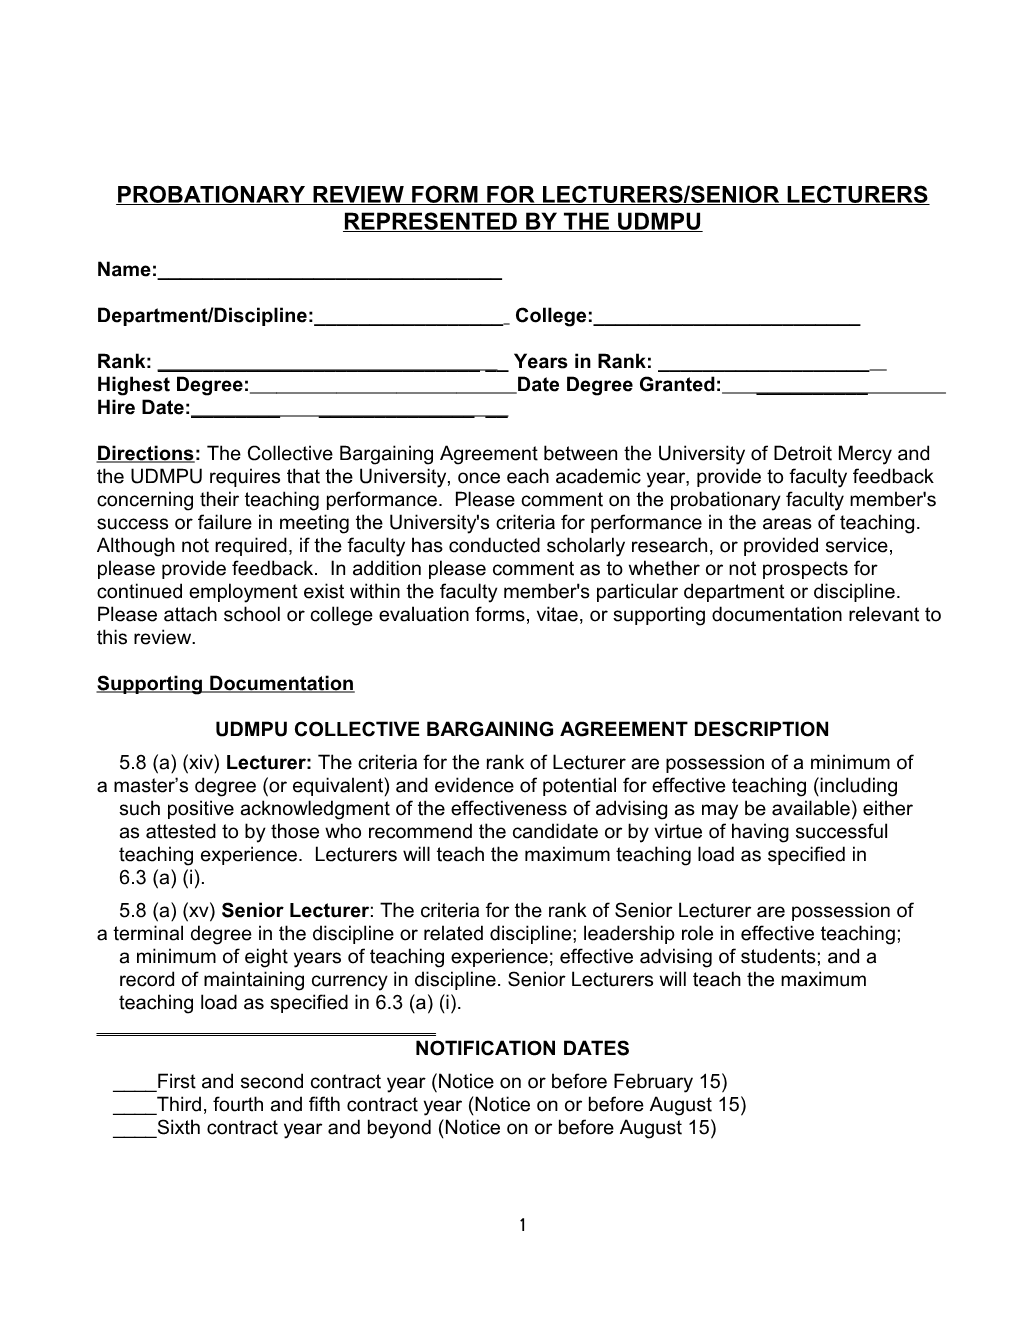 Probationary Review Form for Lecturers/Senior Lecturers